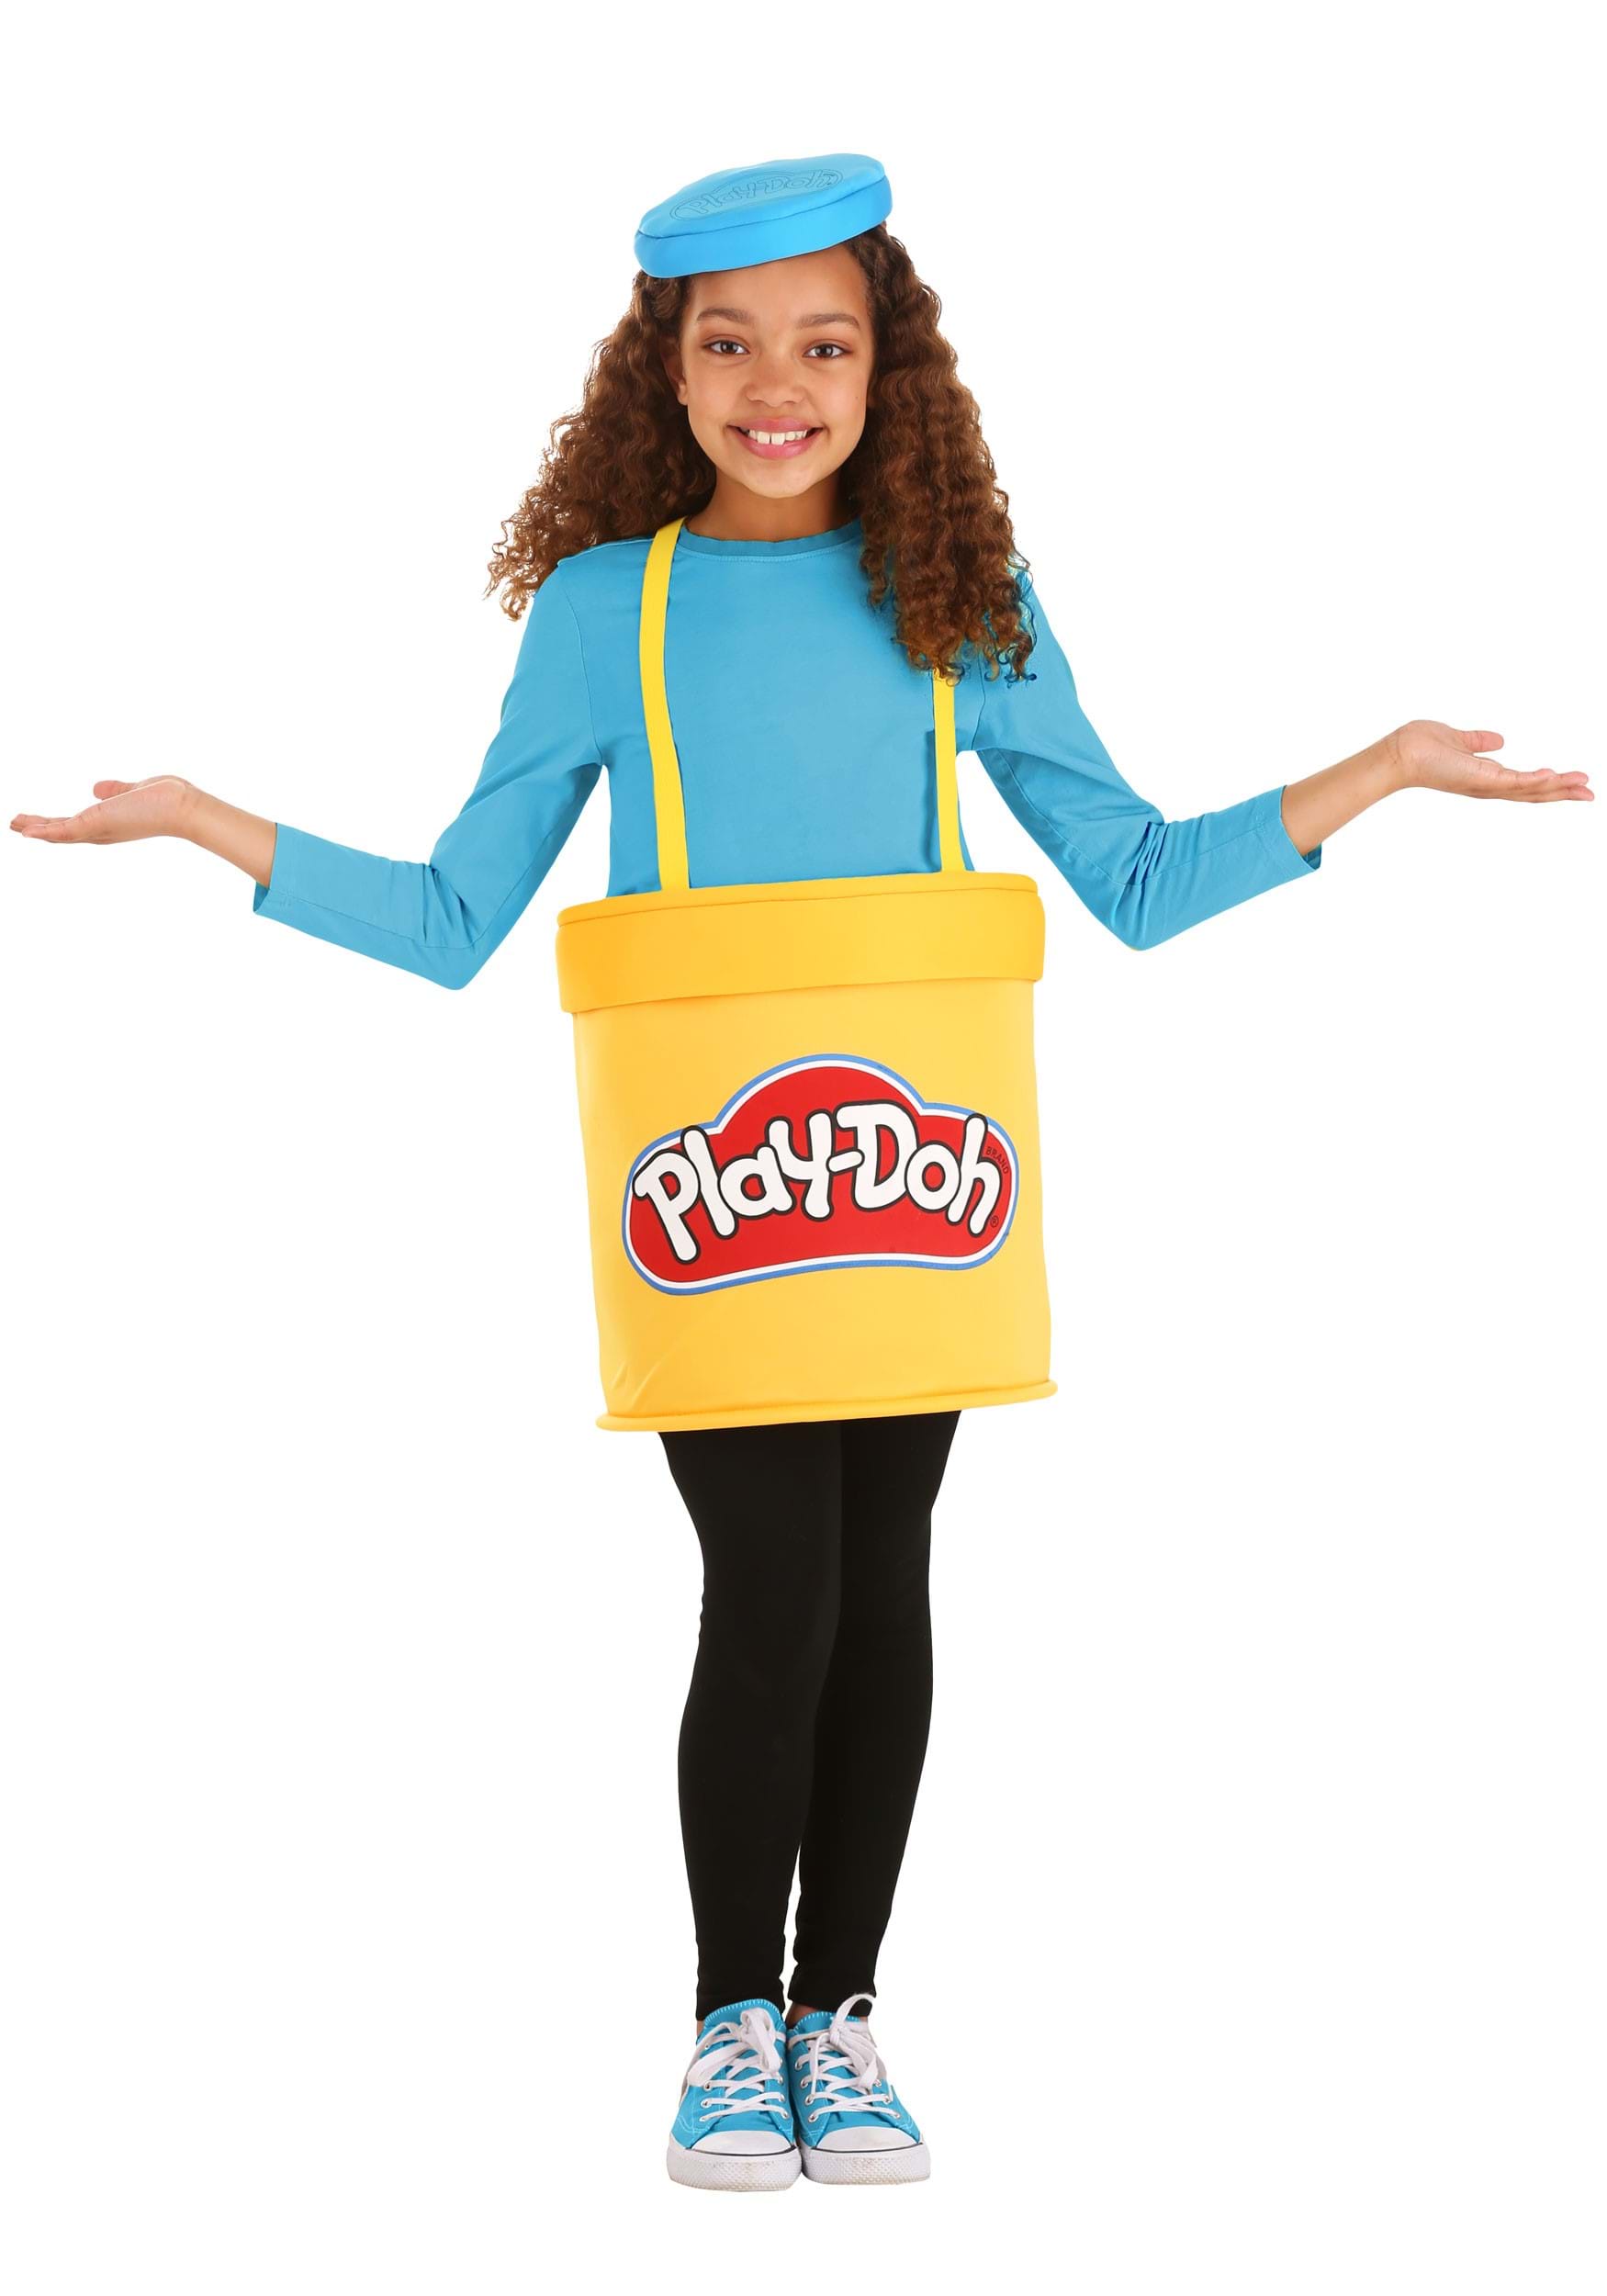 Play-Doh Kids Costume | Toys & Crafts Halloween Costumes